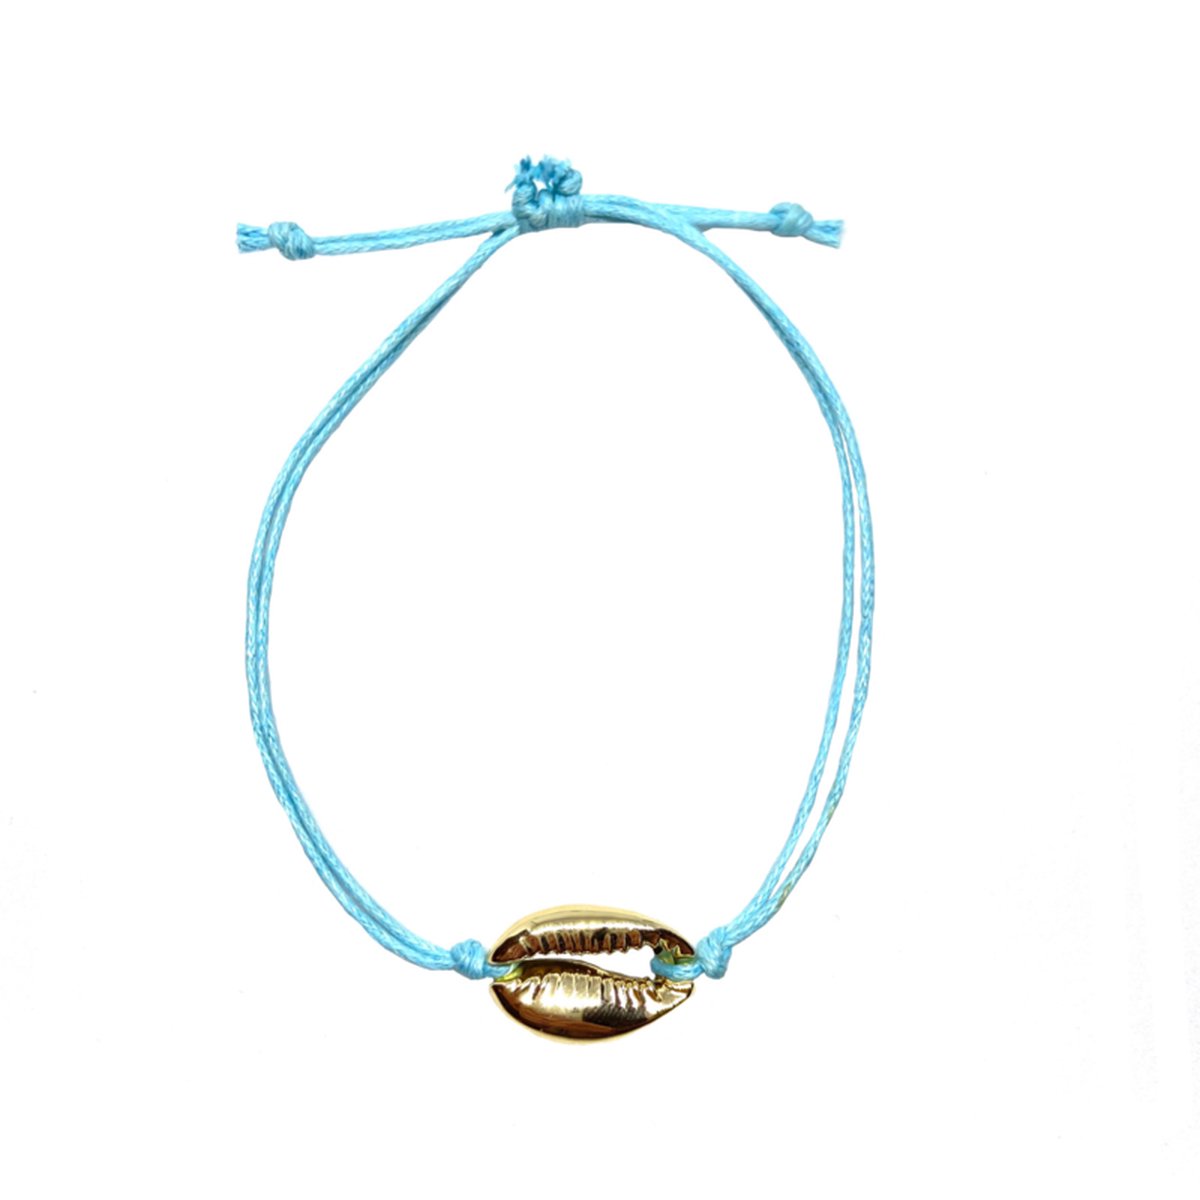 Bracelet with one silver shell - blue